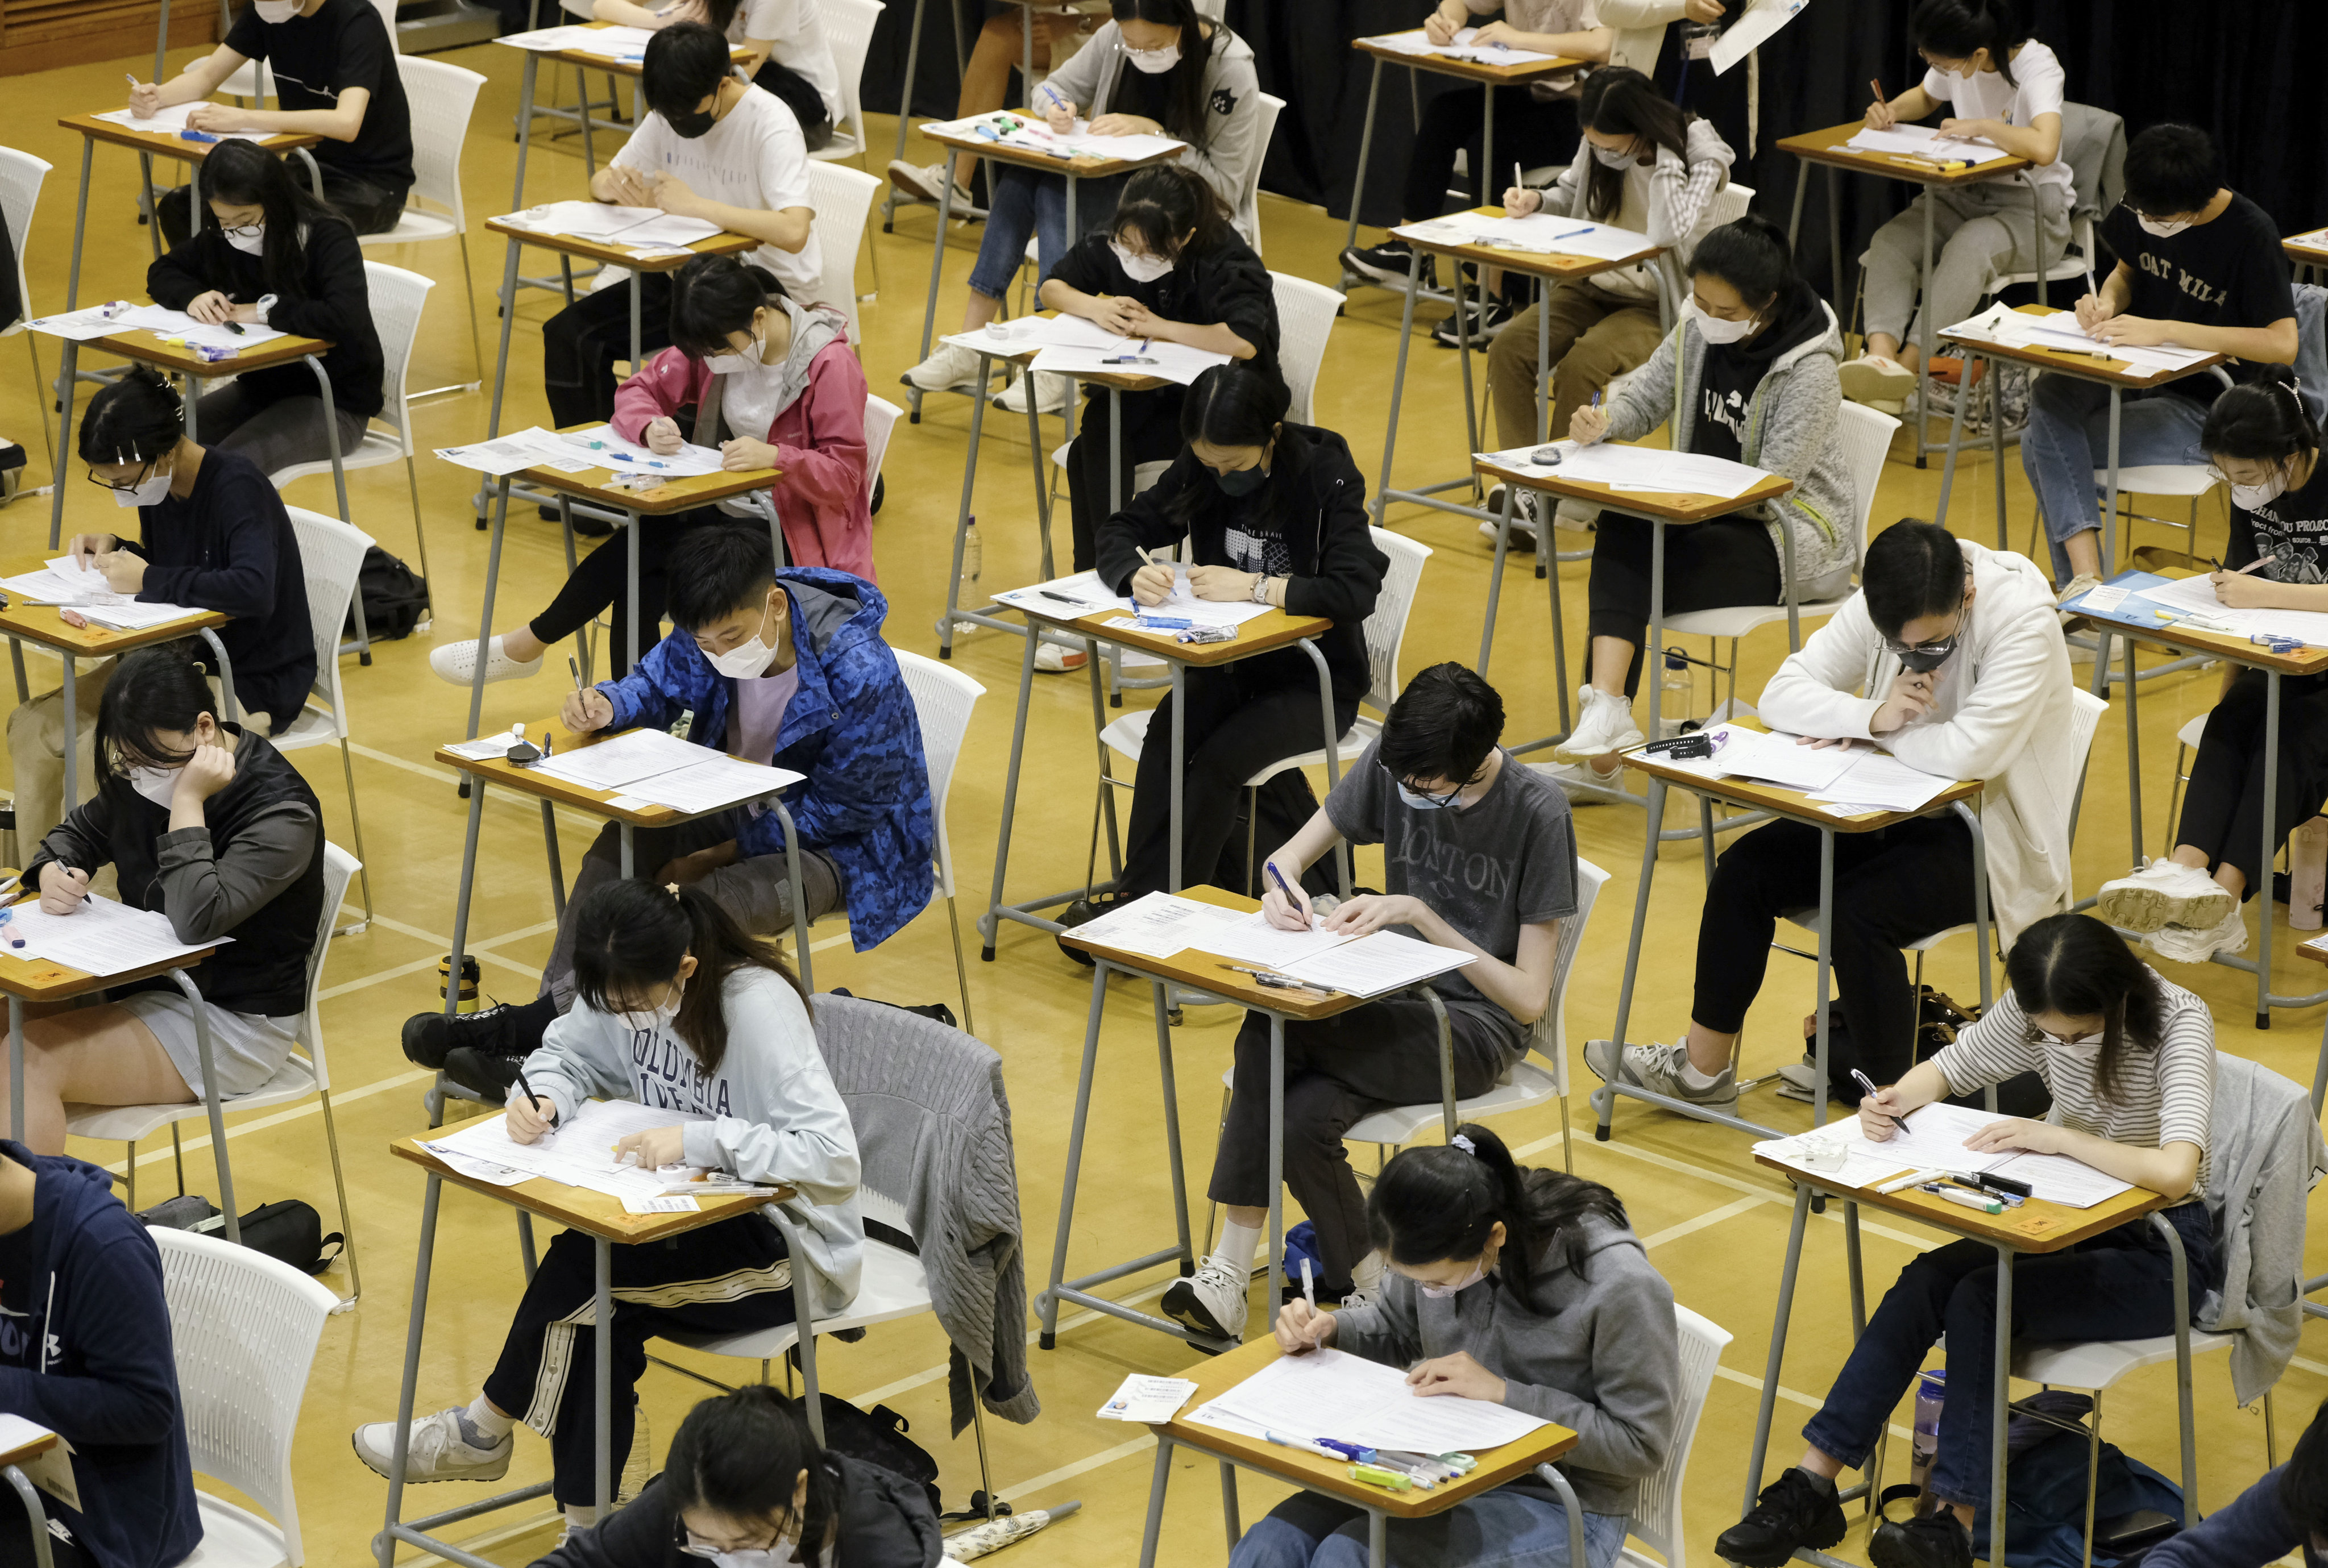 Pupils at Hong Kong University Graduate Association College get their heads down on Monday for the English paper of the Diploma of Secondary Education exams. Photo: Handout